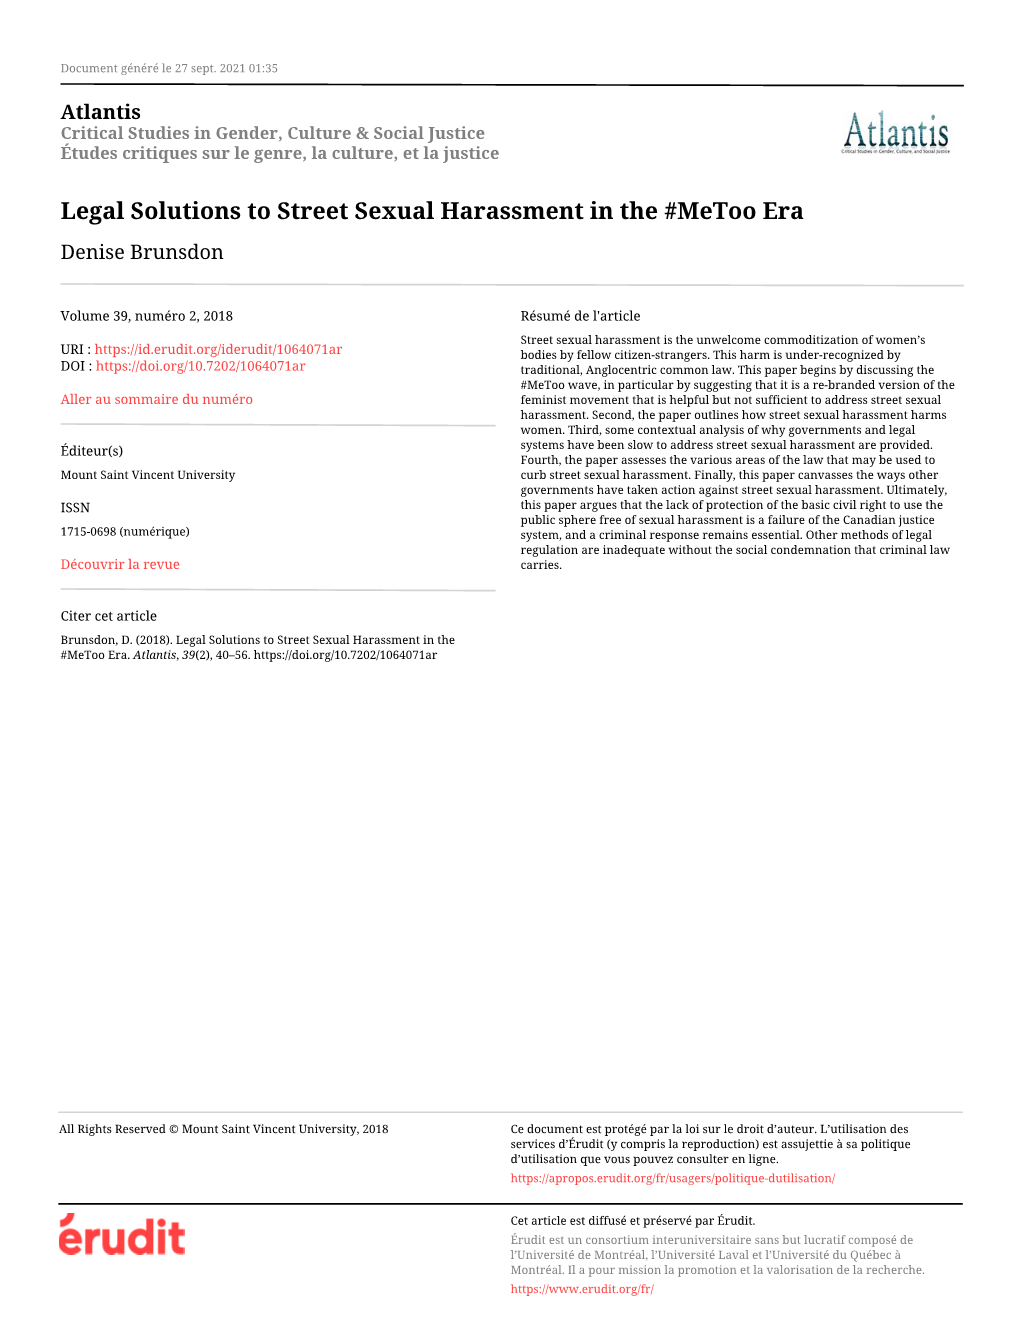 Legal Solutions to Street Sexual Harassment in the #Metoo Era Denise Brunsdon